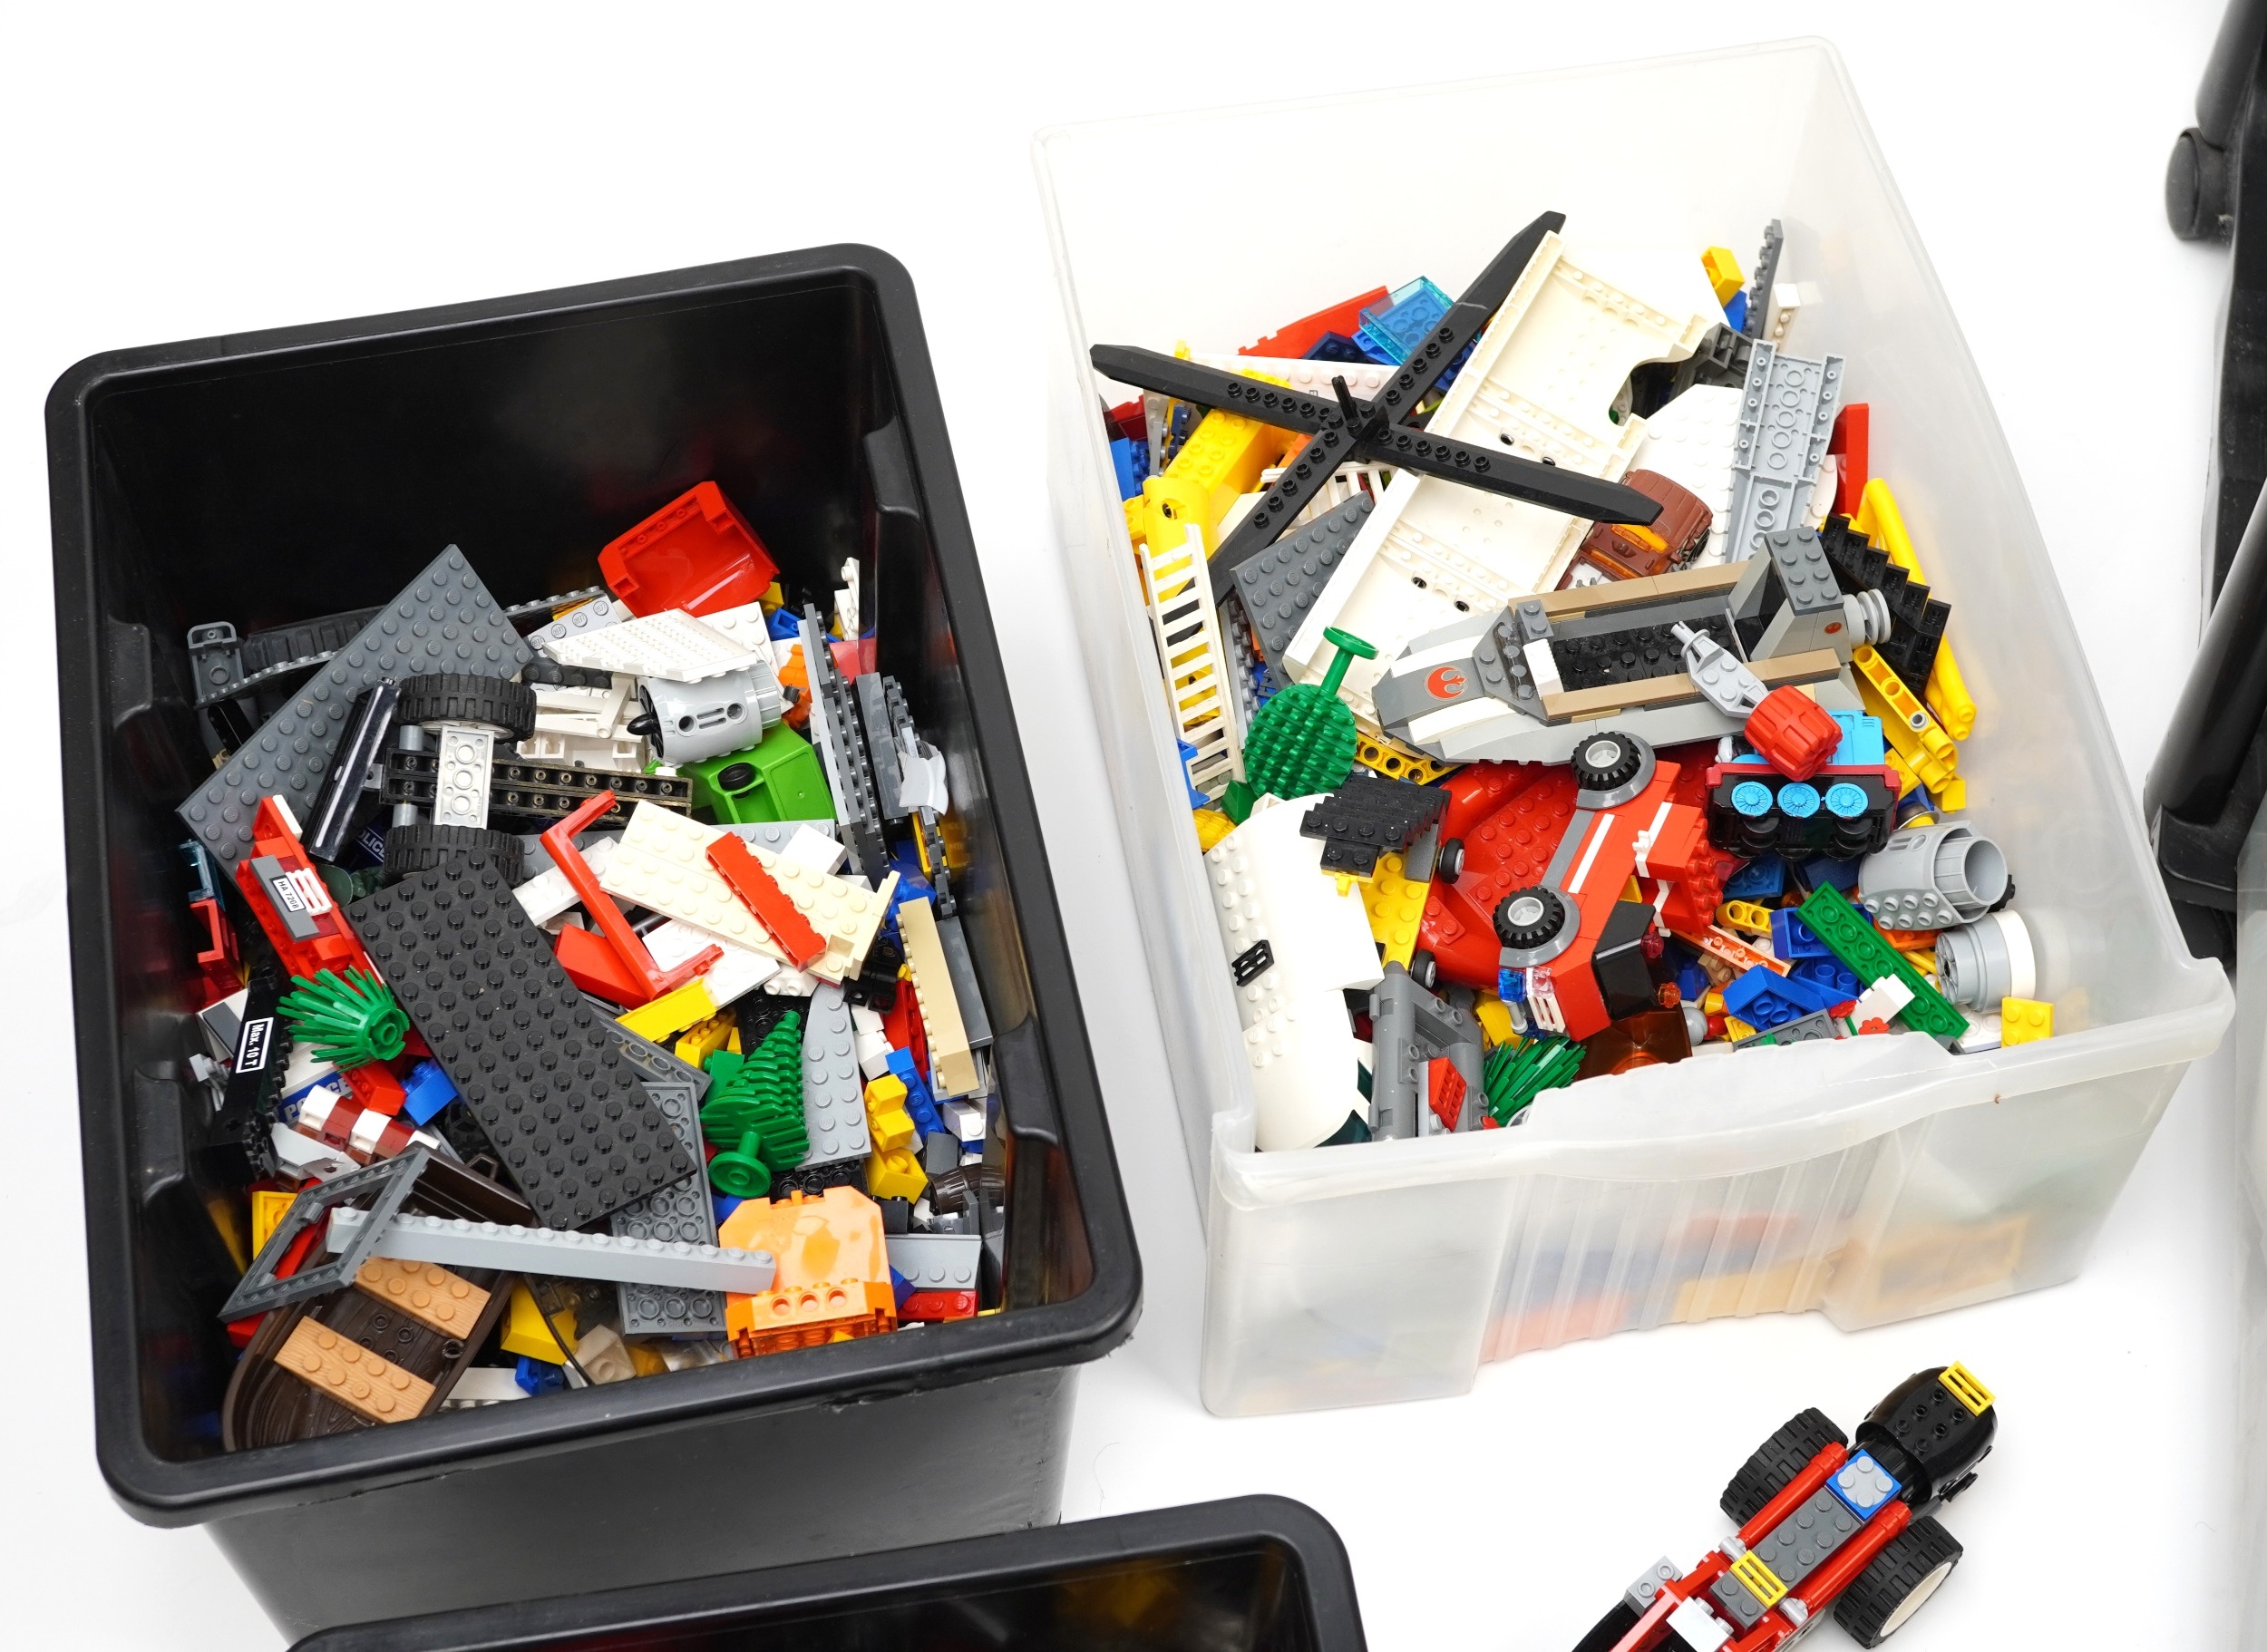 Extensive collection of vintage and later Lego, accessories and instruction booklets, some